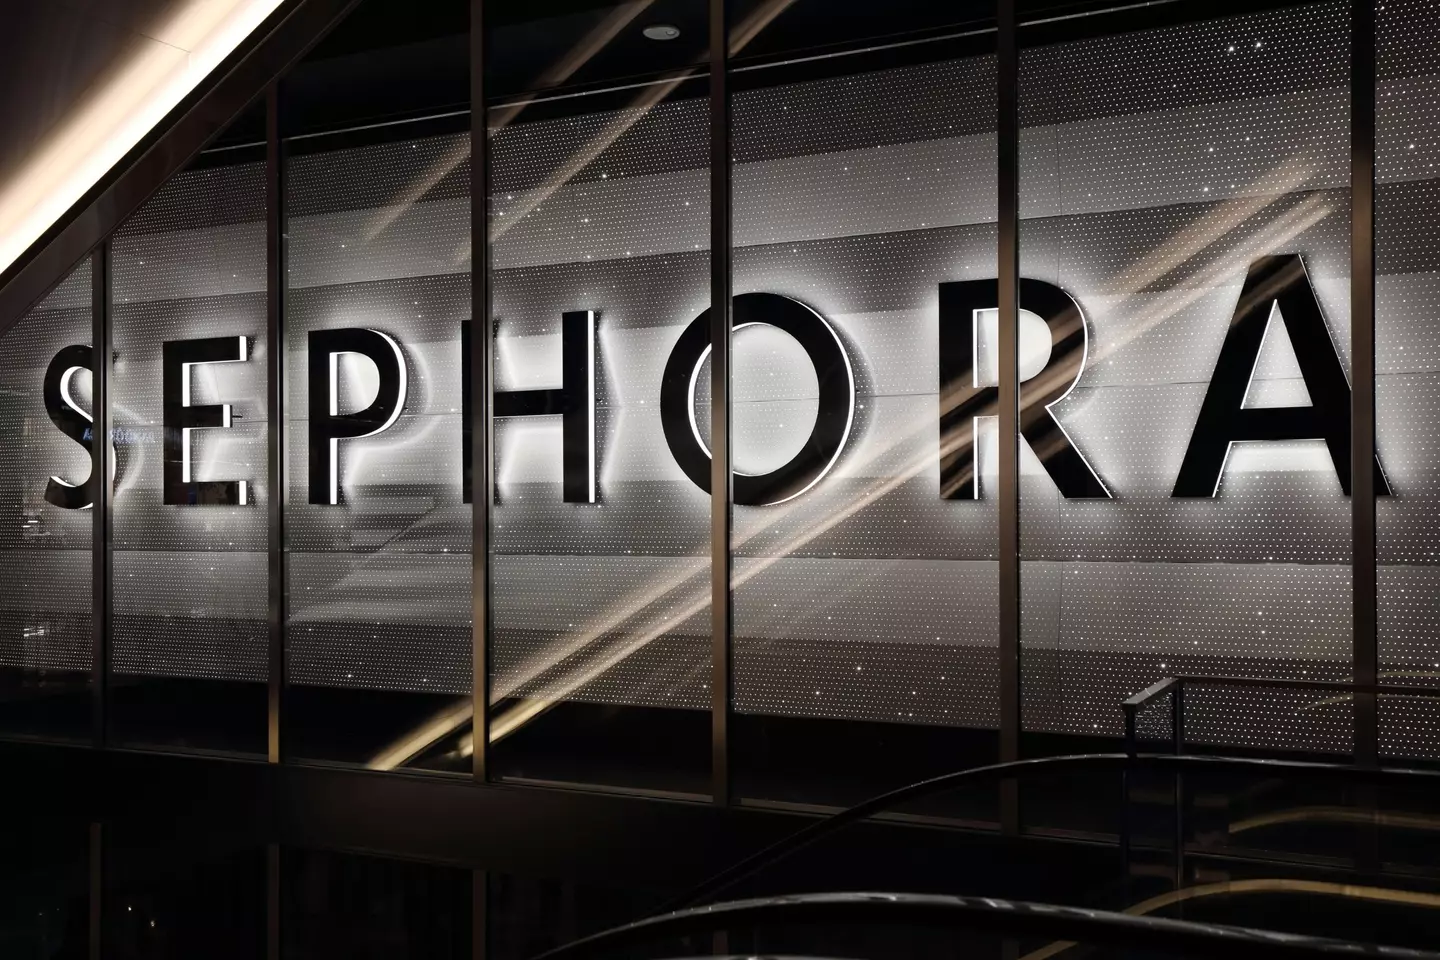 Sephora will be opening its doors in London.